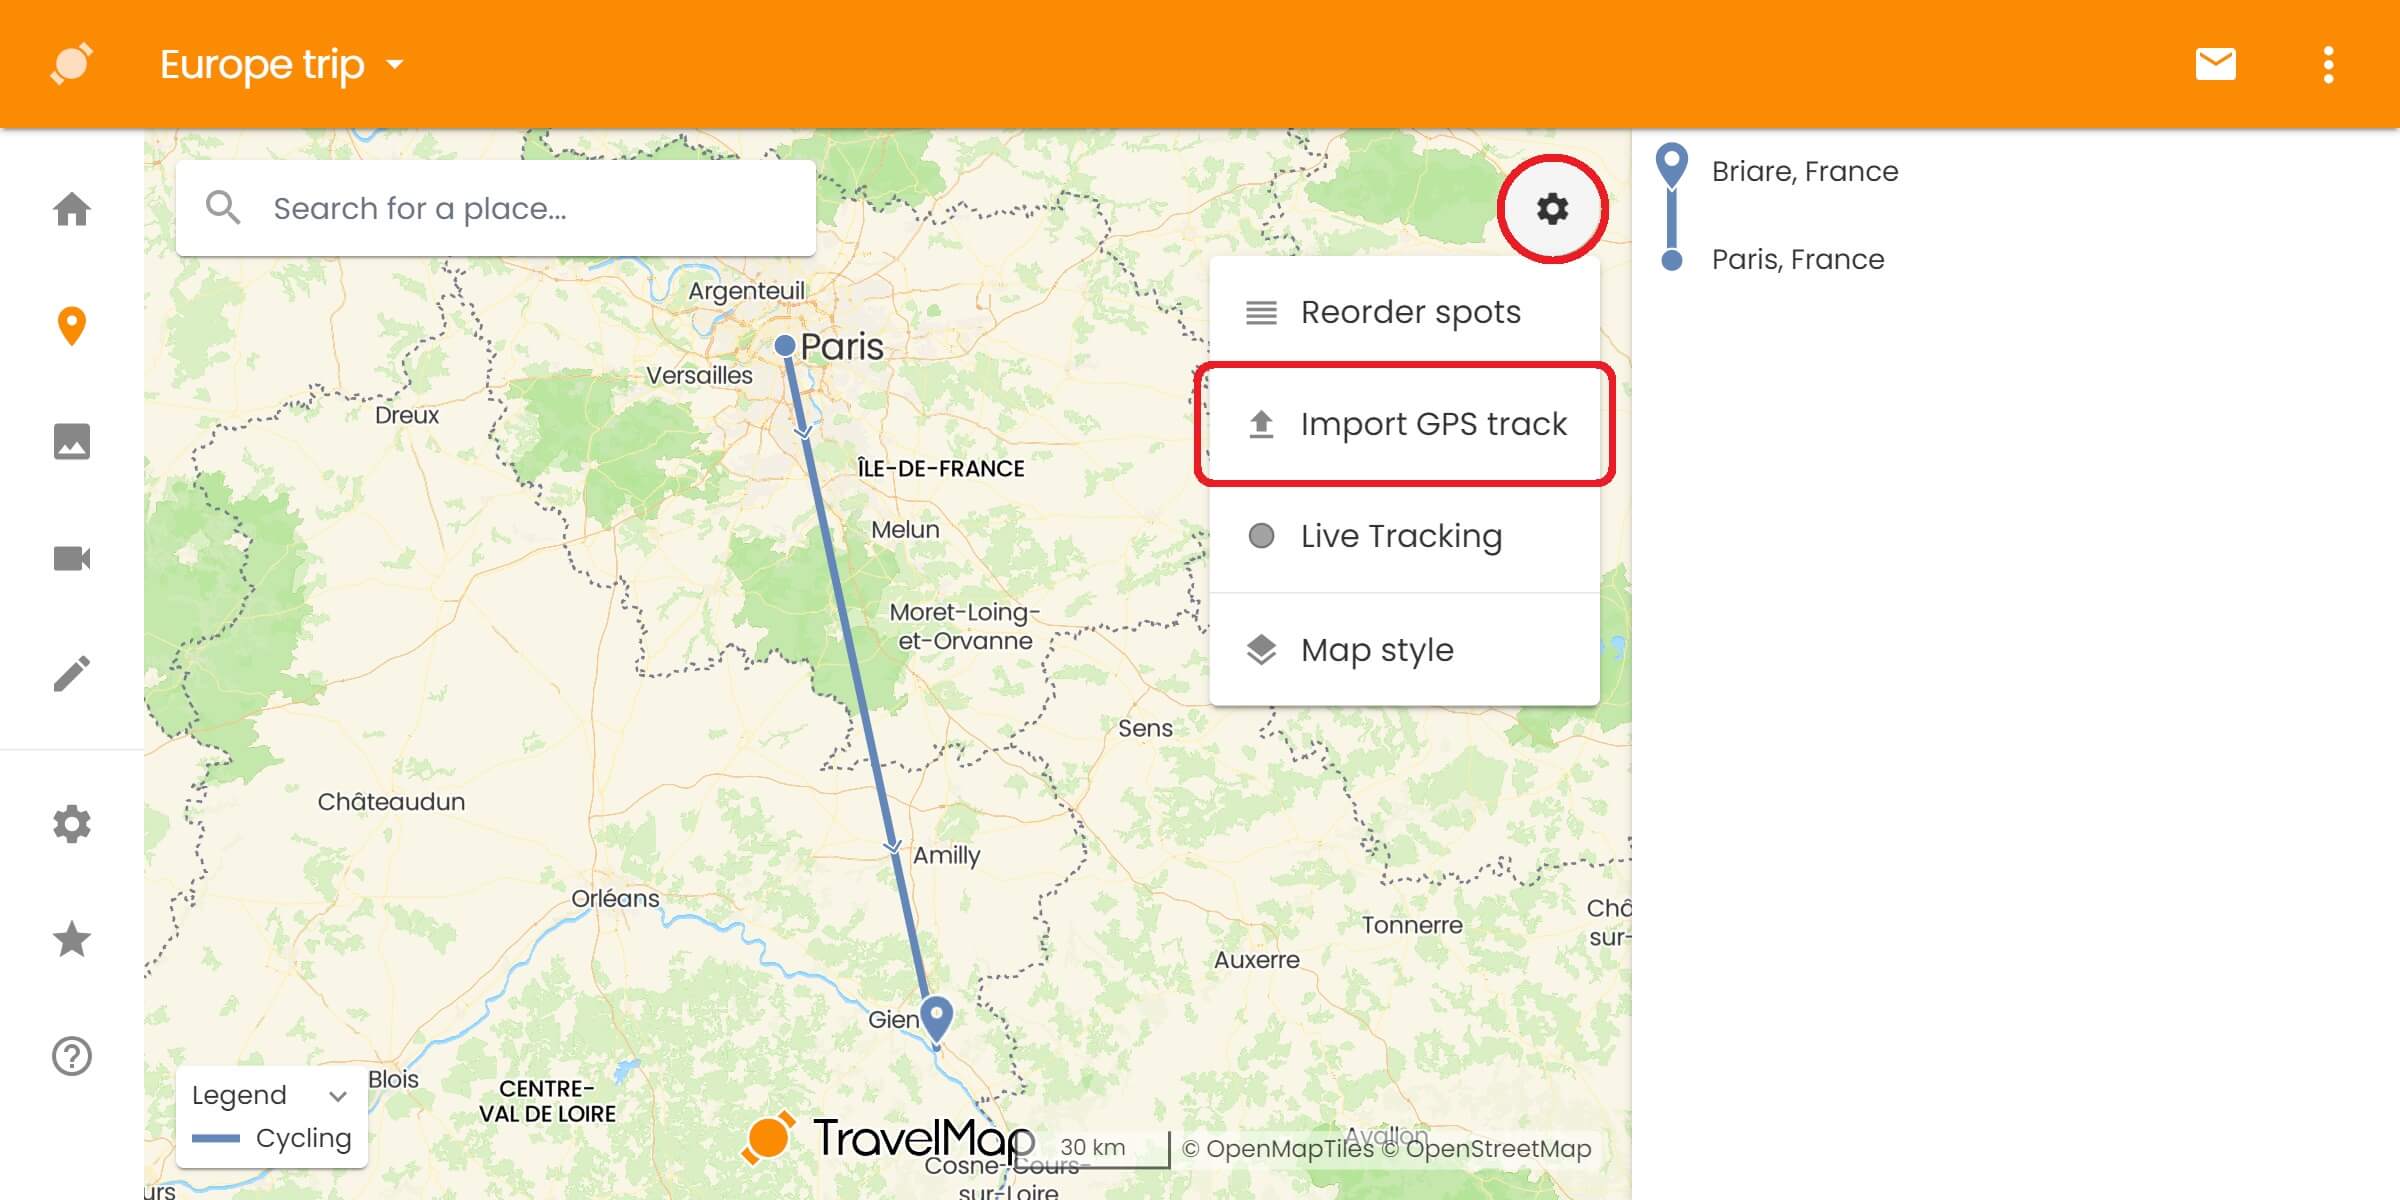 Import GPS track button